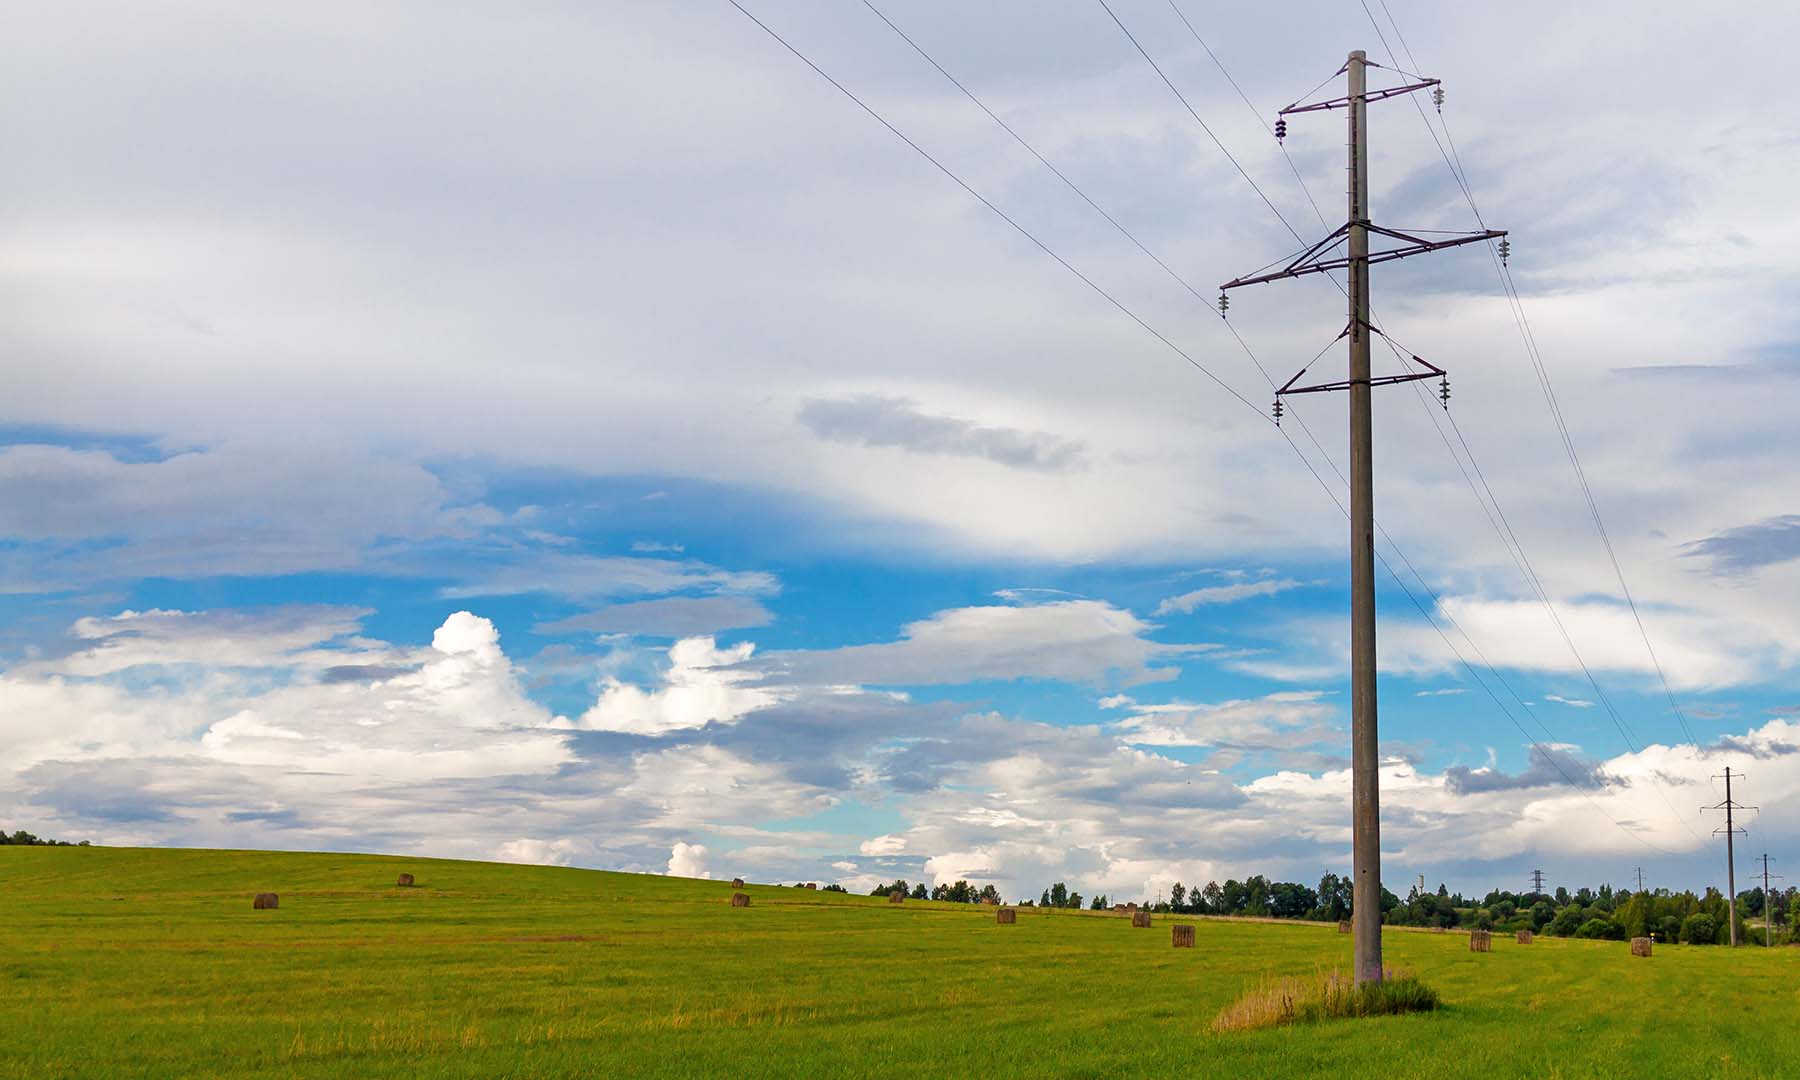 Electricity powerlines in a grassy field